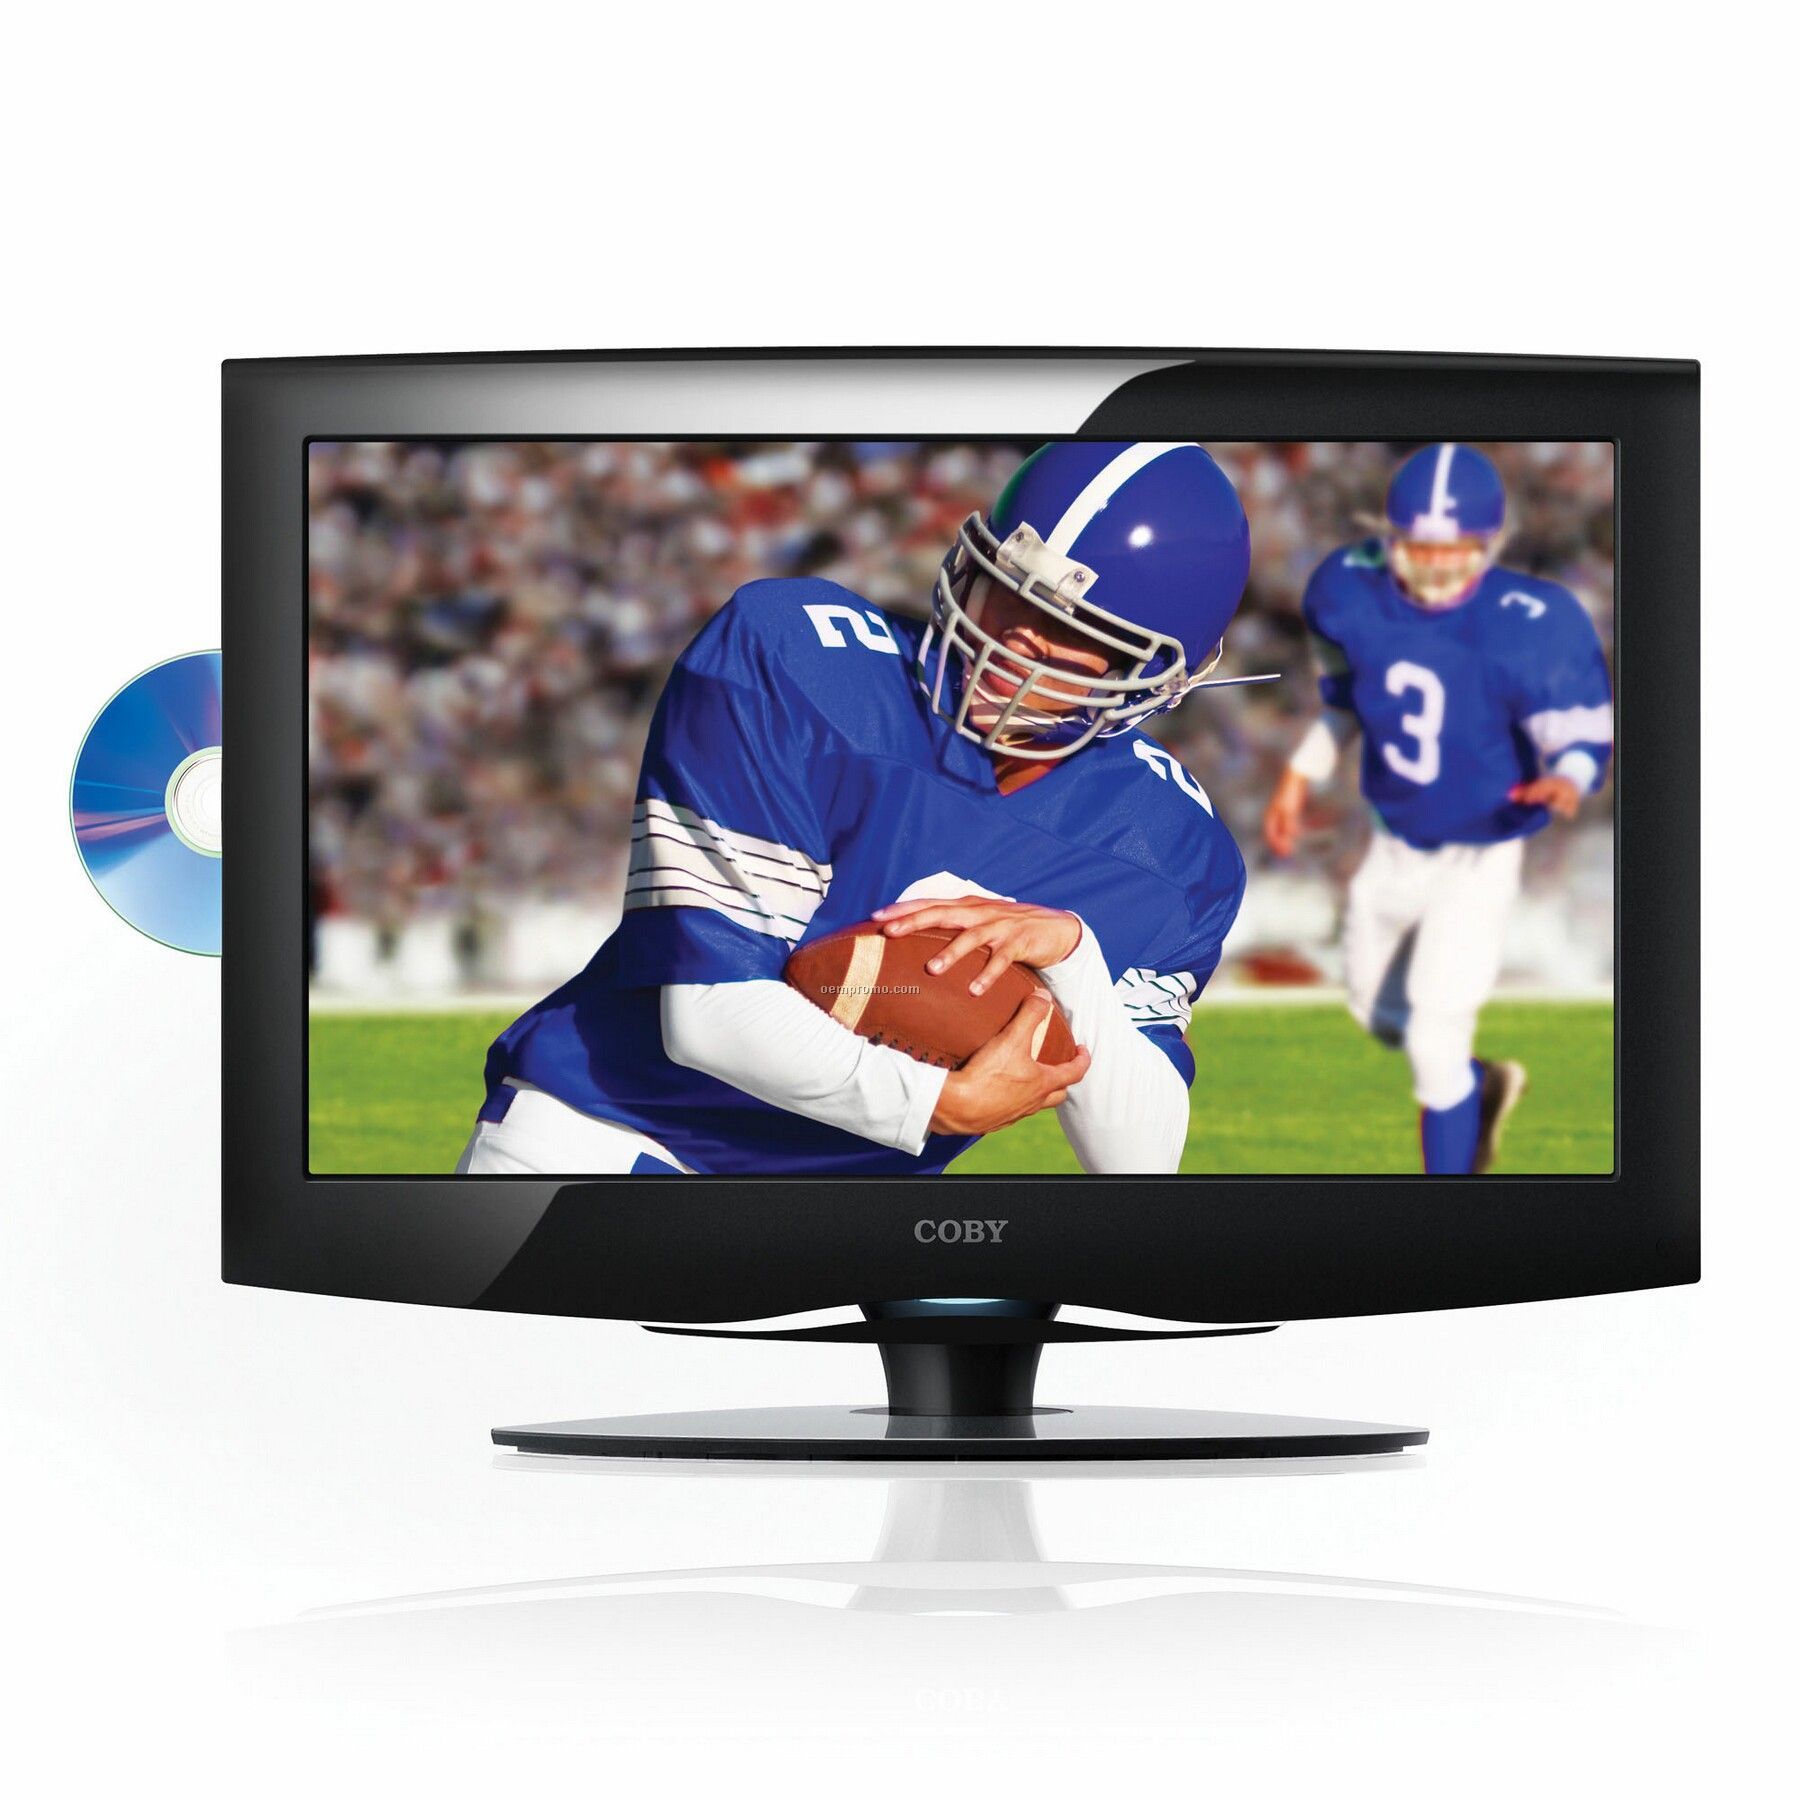 Coby 19" Widescreen Lcd Hdtv/DVD Combo